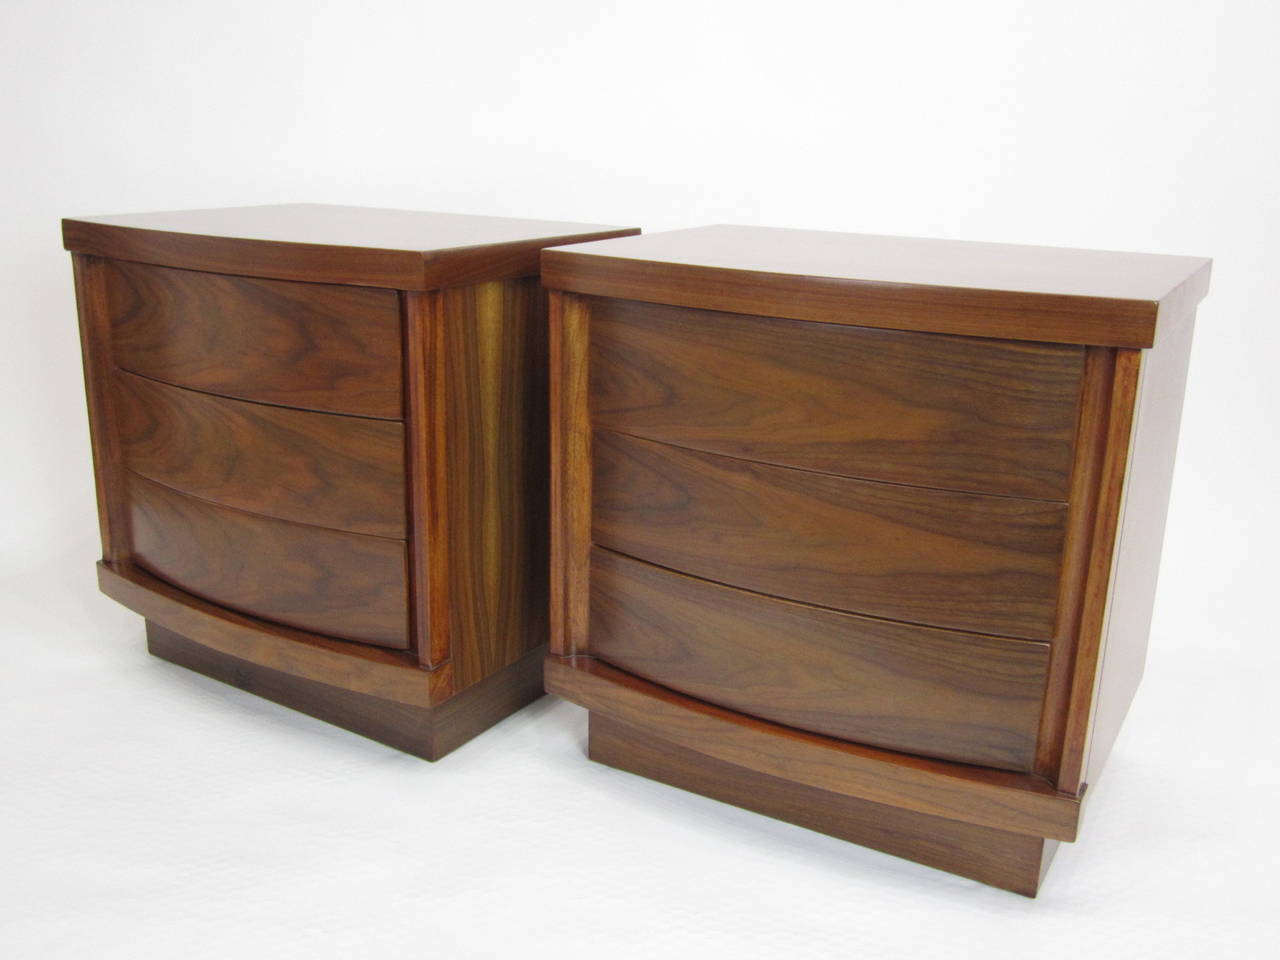 American Pair of Walnut Side Tables with Curved Fronts